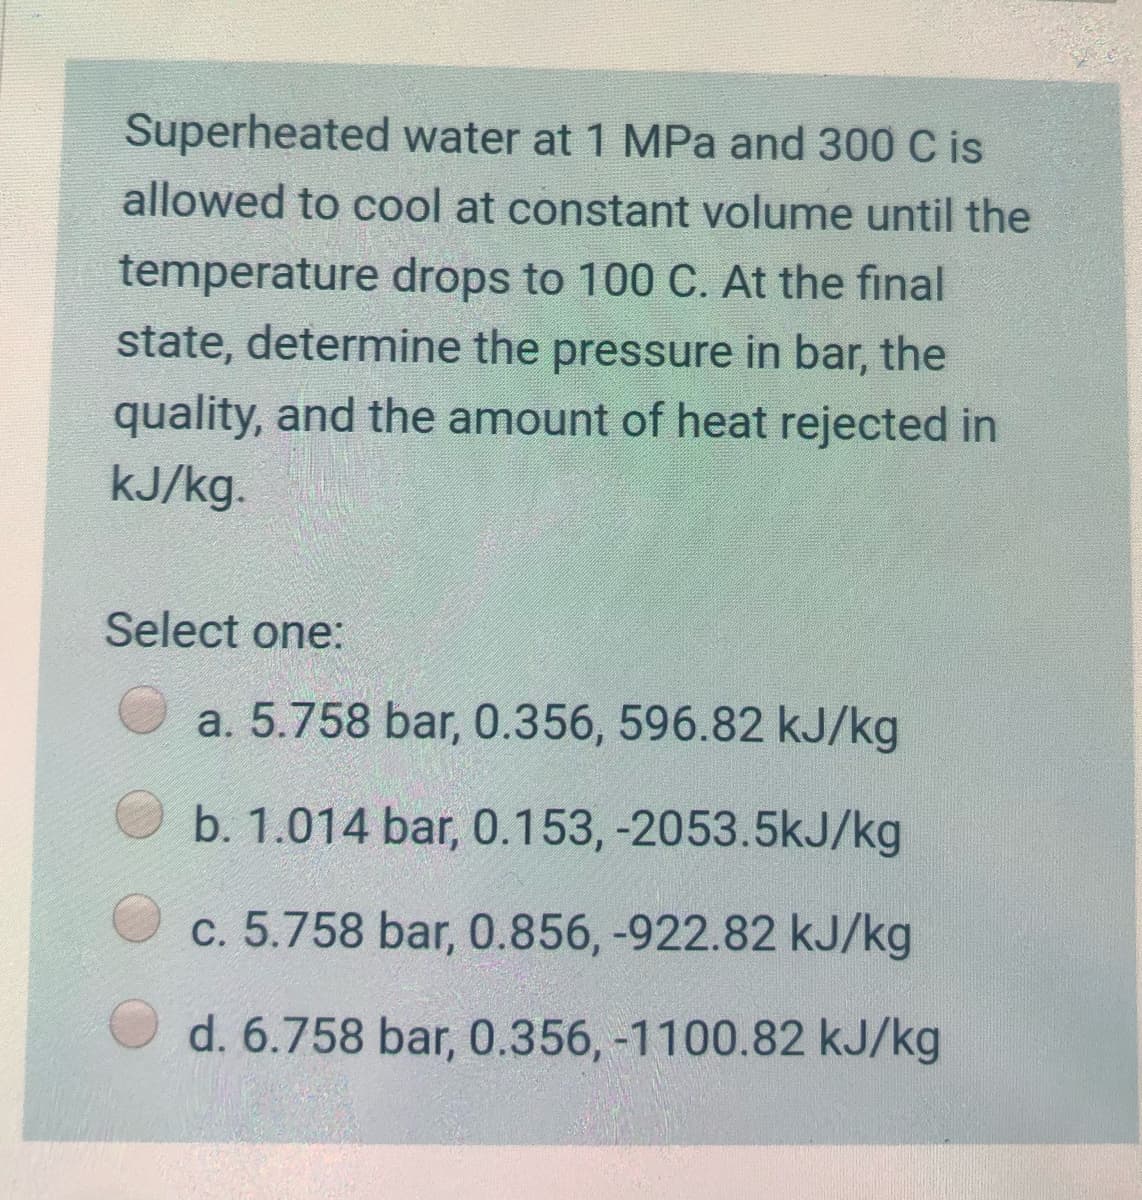 Superheated water at 1 MPa and 300 C is
allowed to cool at constant volume until the
temperature drops to 100 C. At the final
state, determine the pressure in bar, the
quality, and the amount of heat rejected in
kJ/kg.
Select one:
a. 5.758 bar, 0.356, 596.82 kJ/kg
b. 1.014 bar, 0.153, -2053.5kJ/kg
c. 5.758 bar, 0.856, -922.82 kJ/kg
d. 6.758 bar, 0.356, -1100.82 kJ/kg
